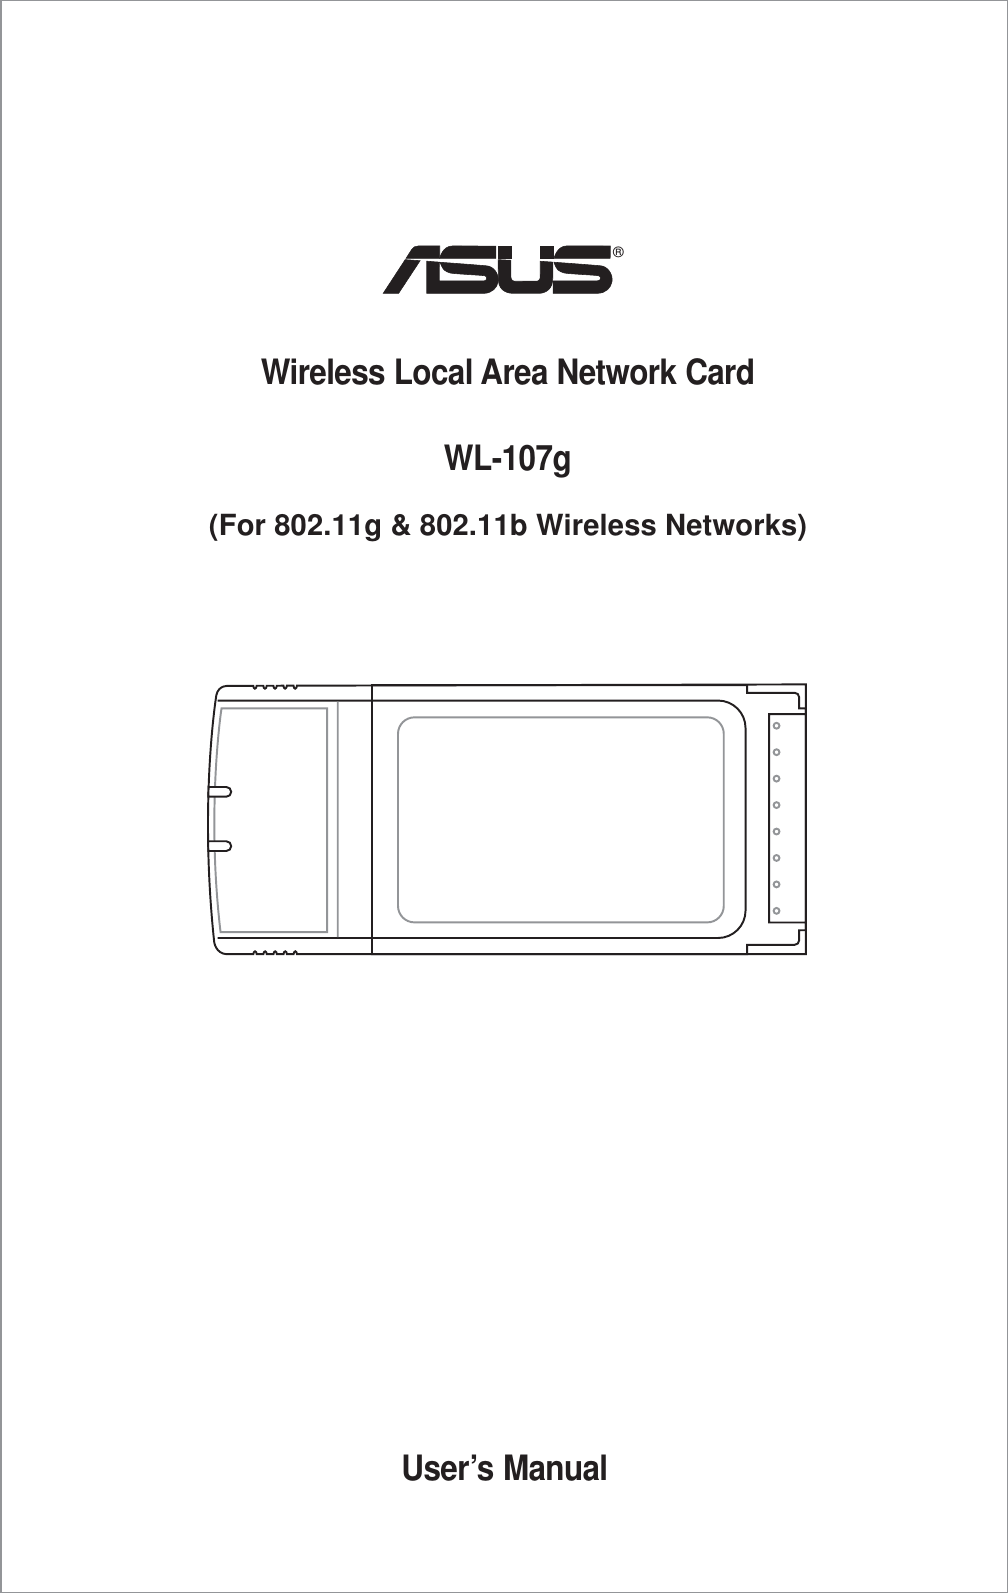 User’s ManualWireless Local Area Network CardWL-107g(For 802.11g &amp; 802.11b Wireless Networks)®